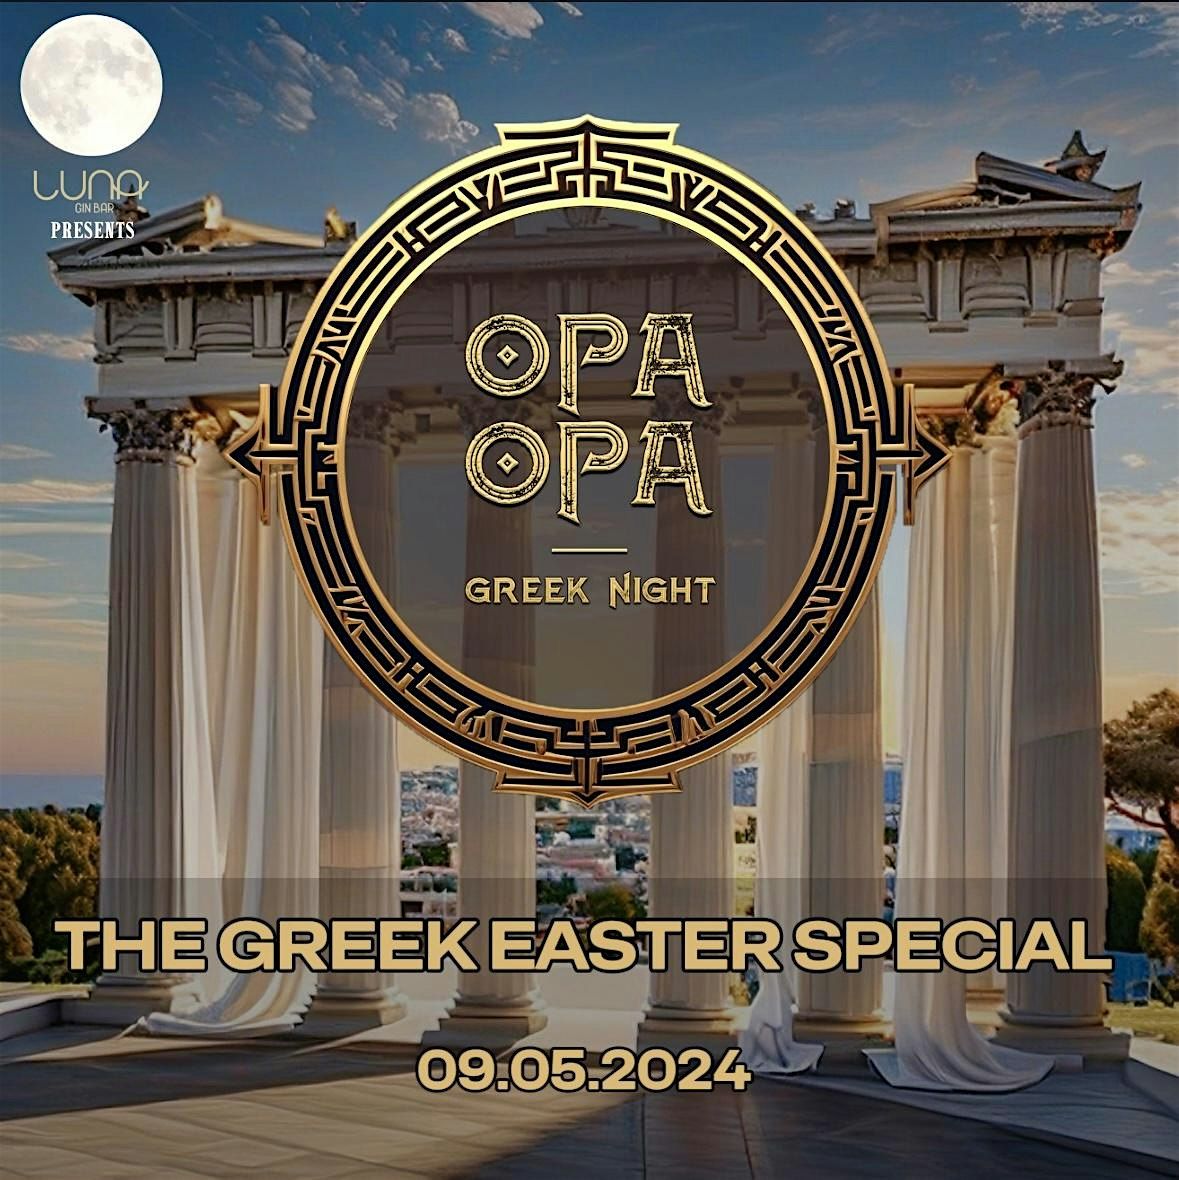 'OPA OPA' LIVE BOUZOUKI NIGHT - THE GREEK EASTER SPECIAL !!